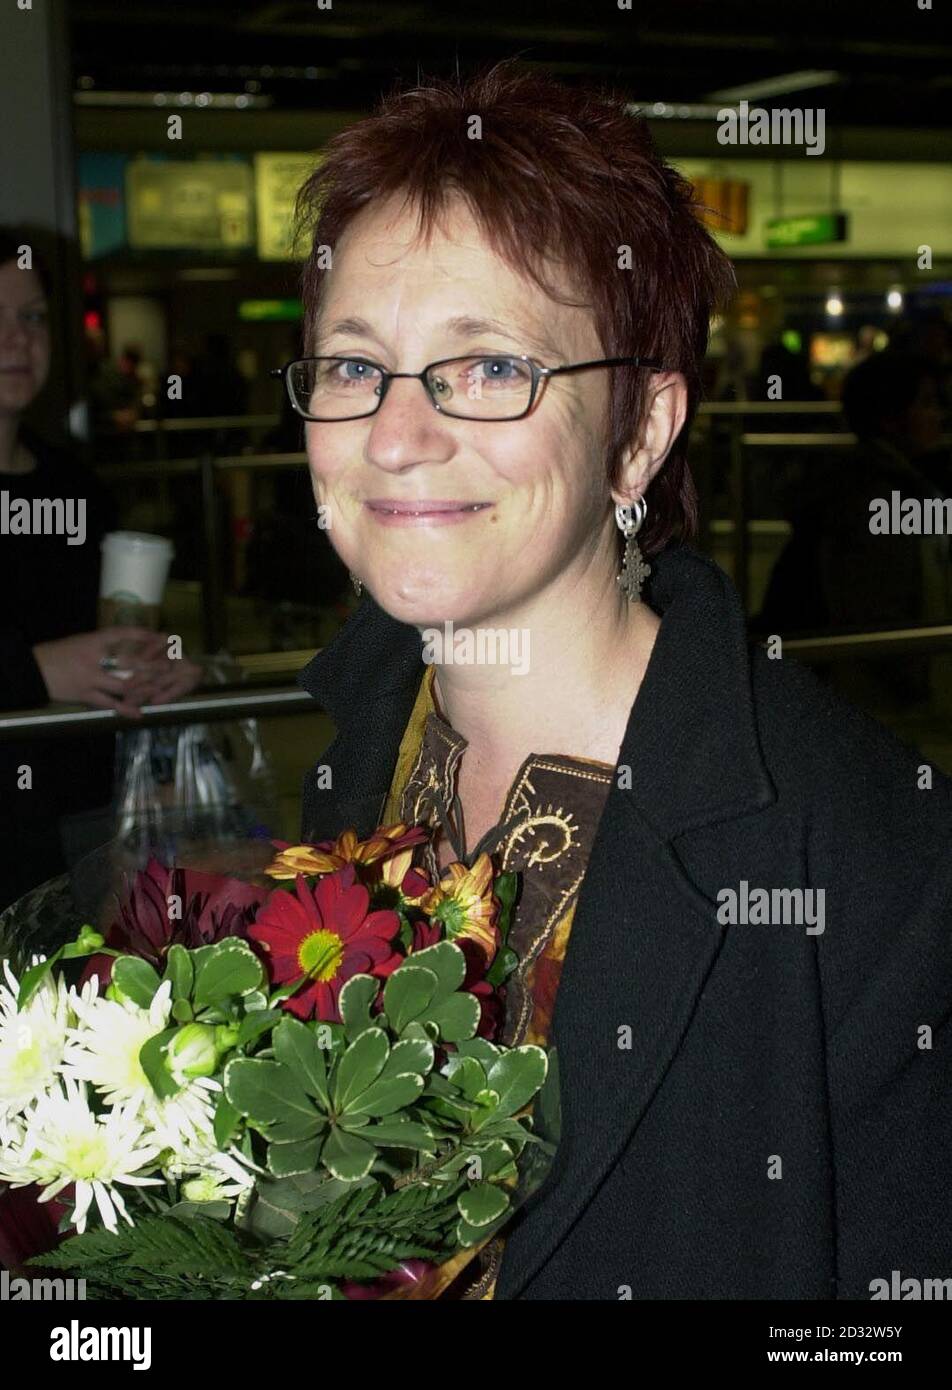 Lesley McCulloch, 40, from Dunoon in Argyll, at Heathrow. She was released on Sunday after being convicted of visa violations by a court in Banda Aceh on December 30, along with US nurse Joy Saddler. The pair, who were arrested on suspicion of spying, *..had already spent more than three months on remand when they were convicted of the lesser charge and ordered to serve out the remainder of their sentences. * 16/02/2003: Lesley McCulloch whose family was Sunday February 16 2003, ready to receive her at the airport where they watched her begin a journey that ended with her arrest over spyin Stock Photo